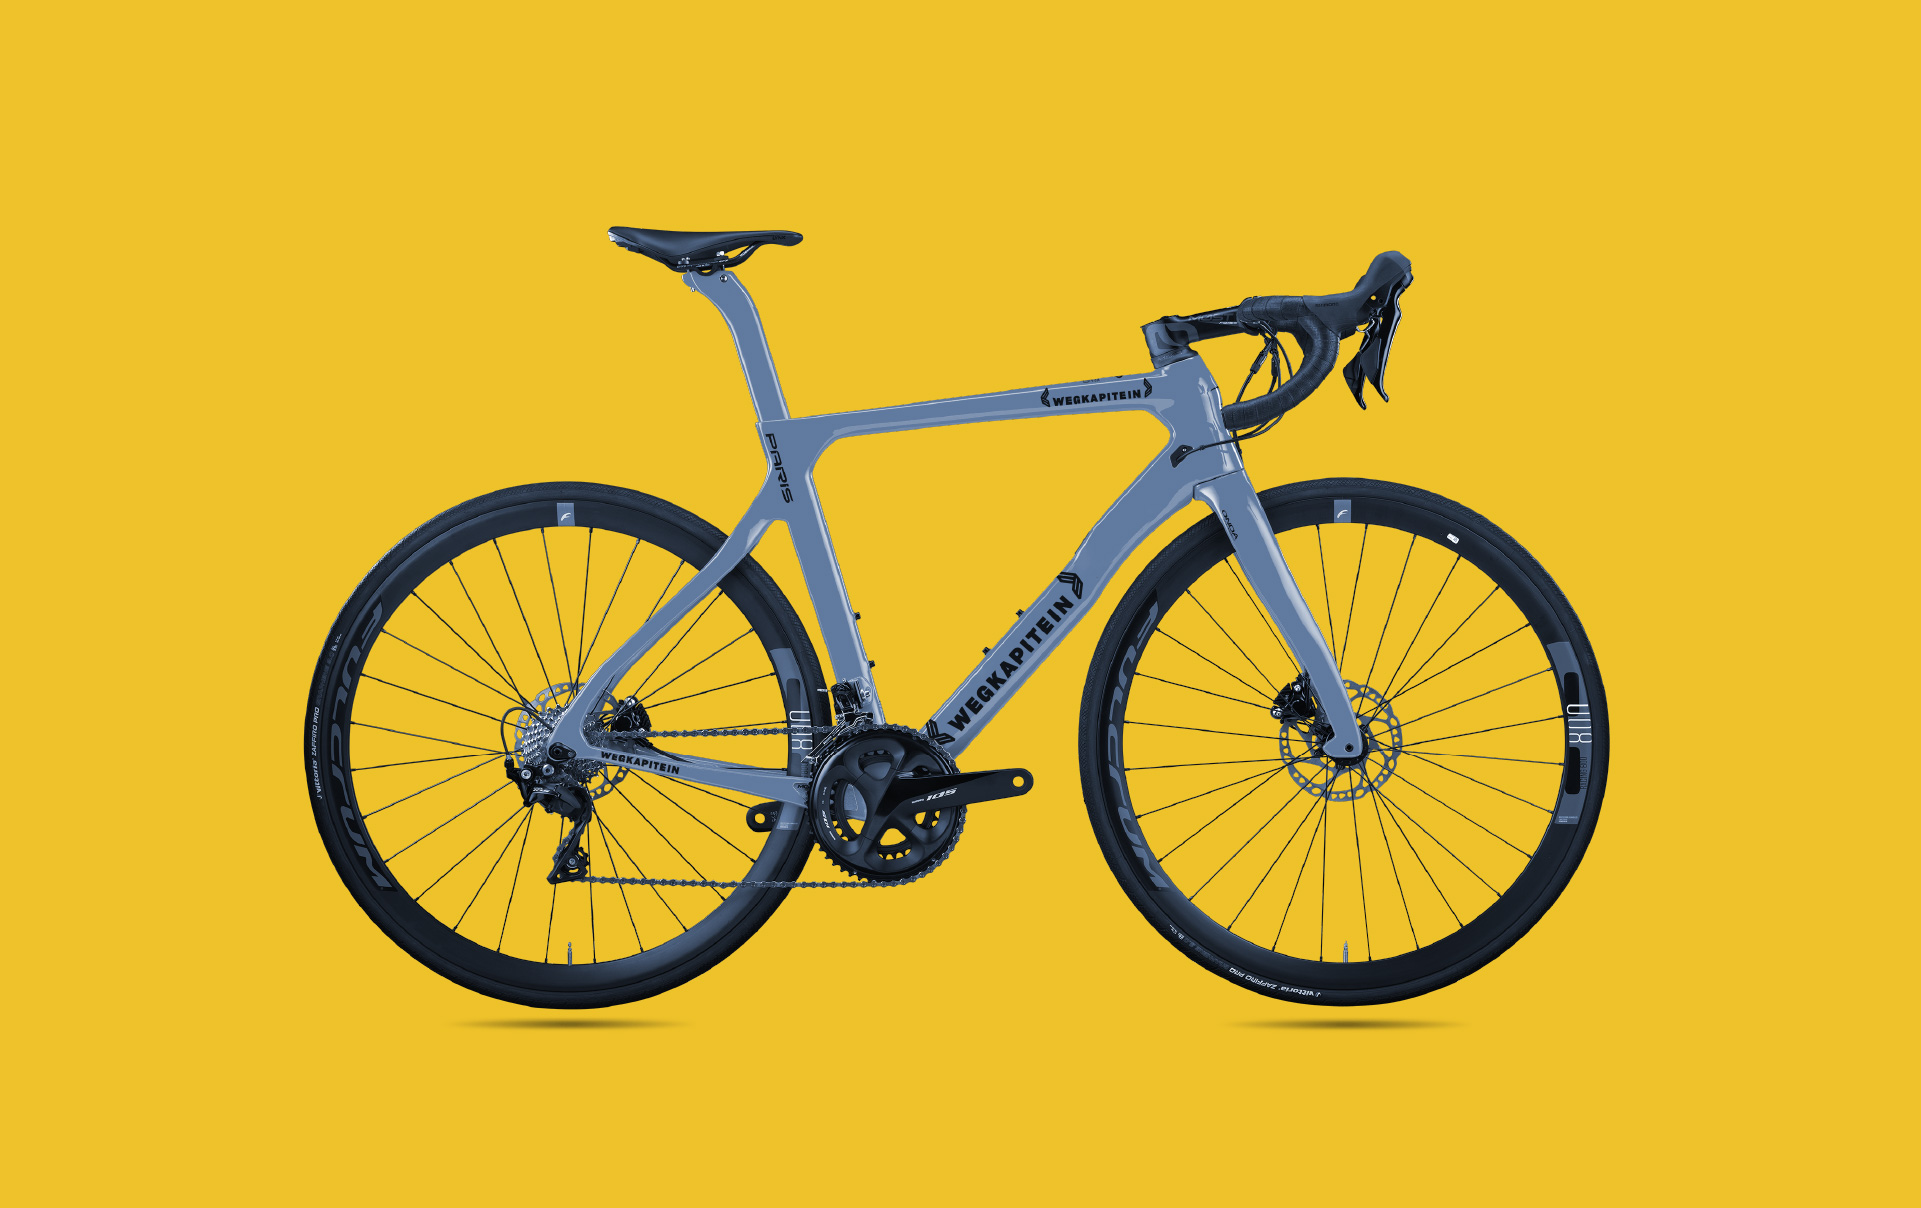 Wegkapitein's branded racing bicycle in blue on a yellow background